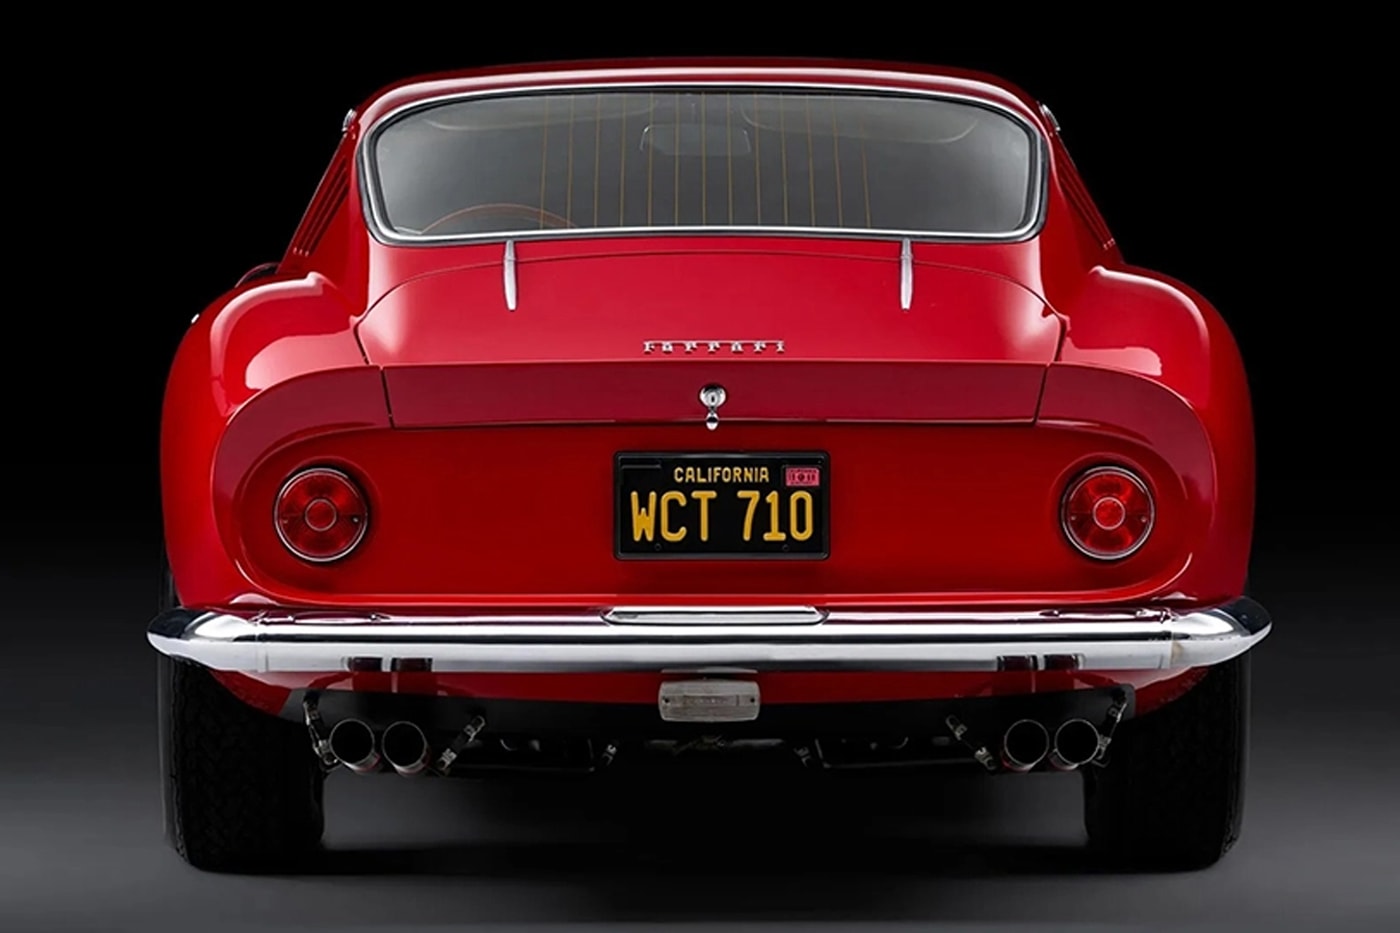 Steve McQueen Classic 1967 Ferrari 275 GTB/4 Expected to fetch up to $7 million usd at Sotheby's Auction actor hollywood long nose coupe rm sotheby's long nosed classic pininifarina 1963 ferrari 250 gt berlinetta lusso